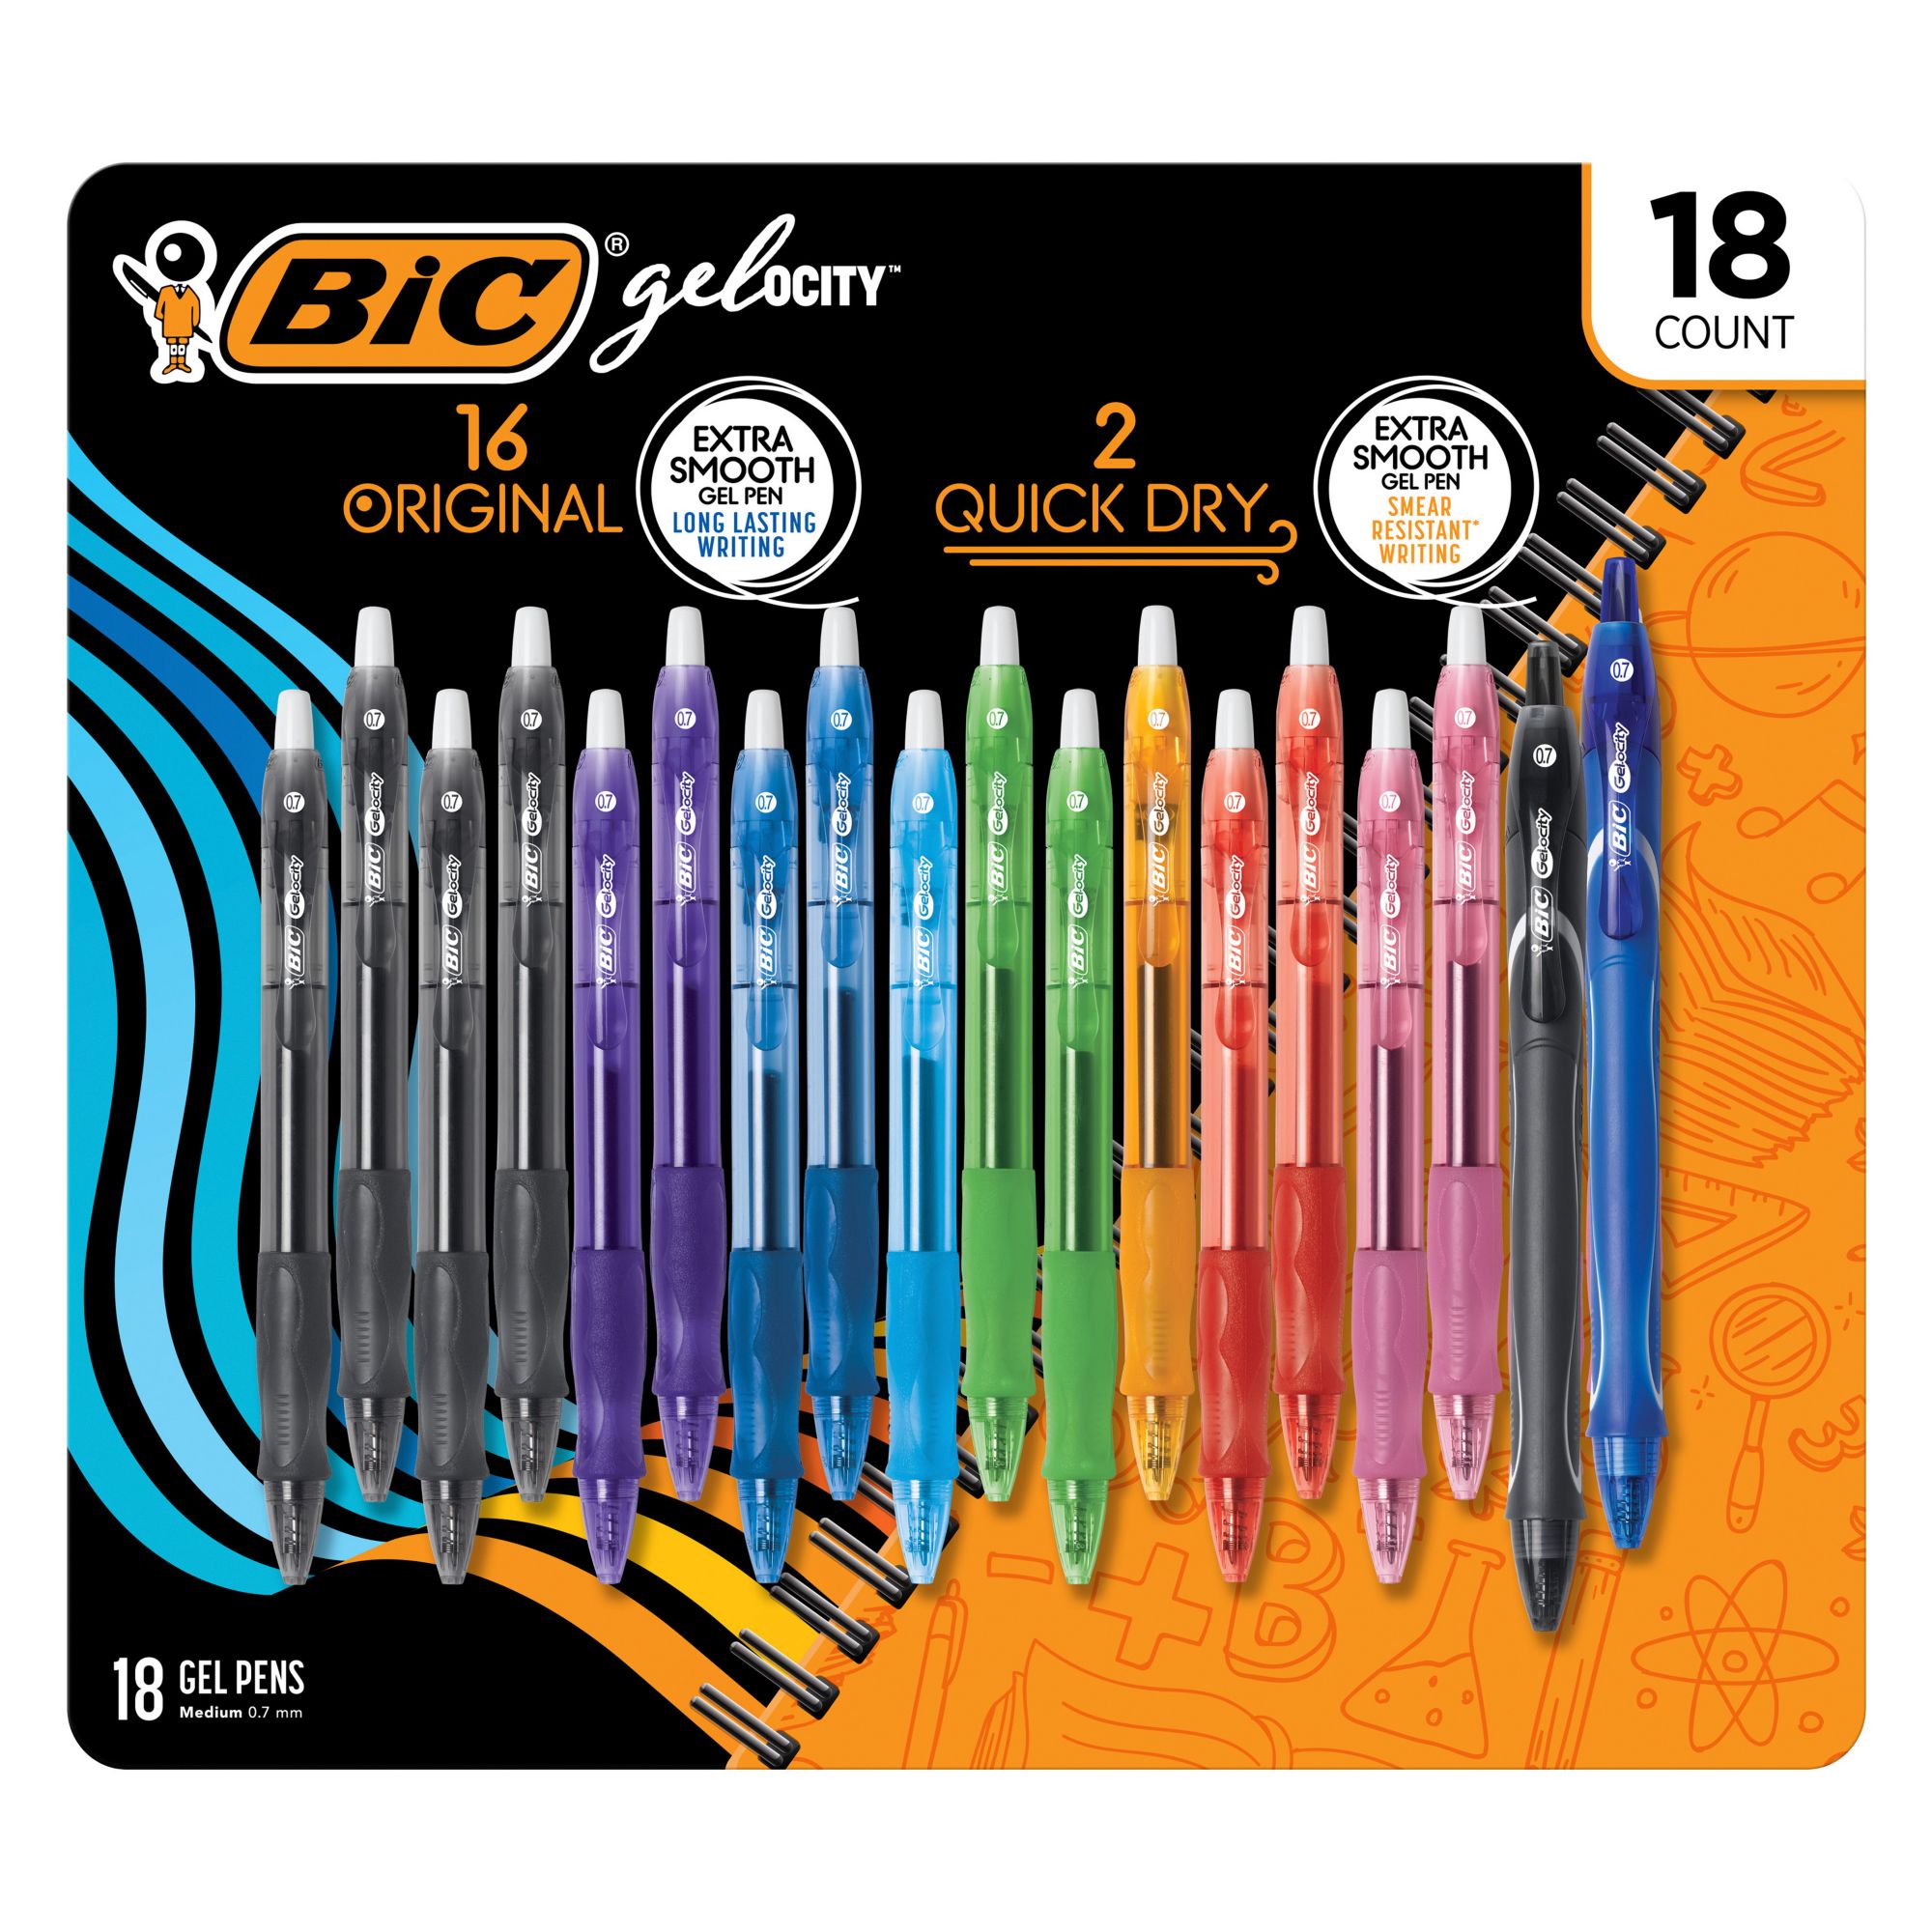 BIC Gelocity Quick Dry Fashion Retractable Gel Pens, Medium Point (0.7mm),  8-Count Gel Pen Set, Colored Gel Pens With Full-Length Grip